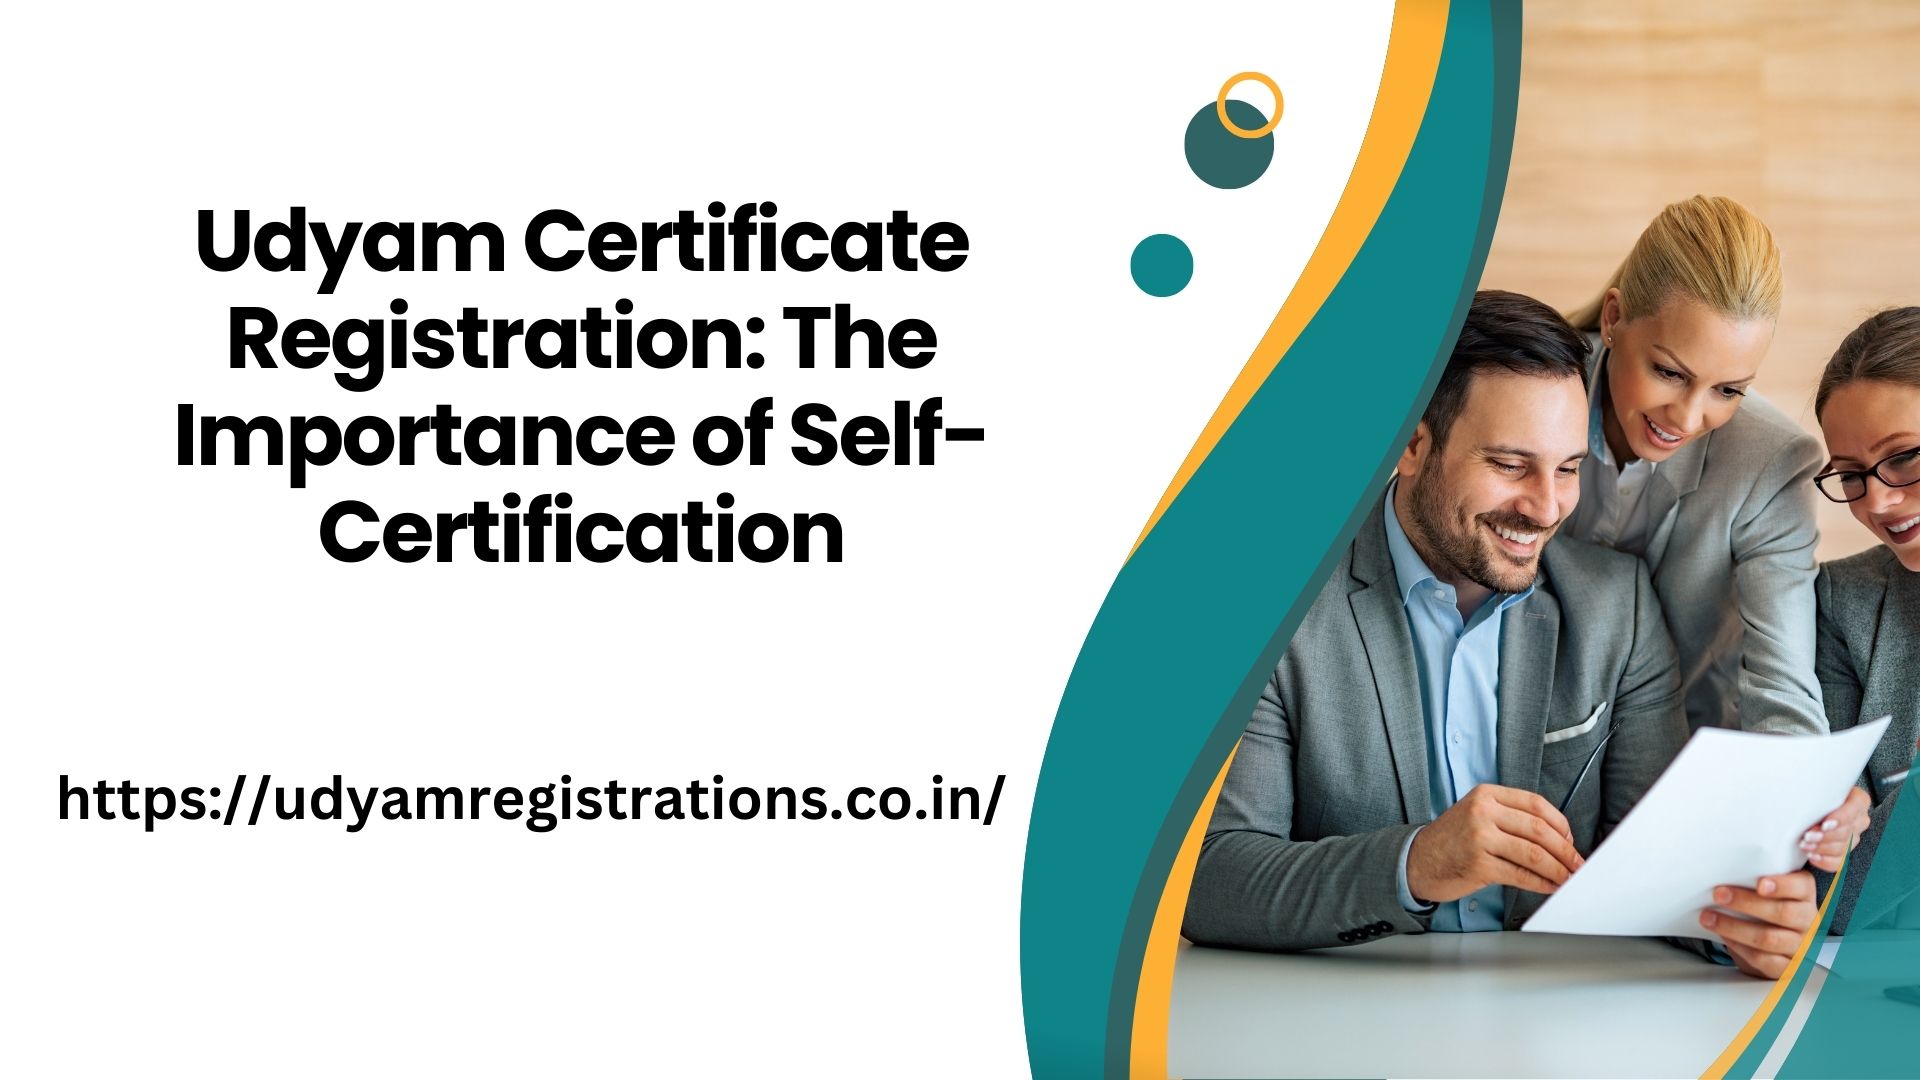 Udyam Certificate Registration: The Importance of Self-Certification